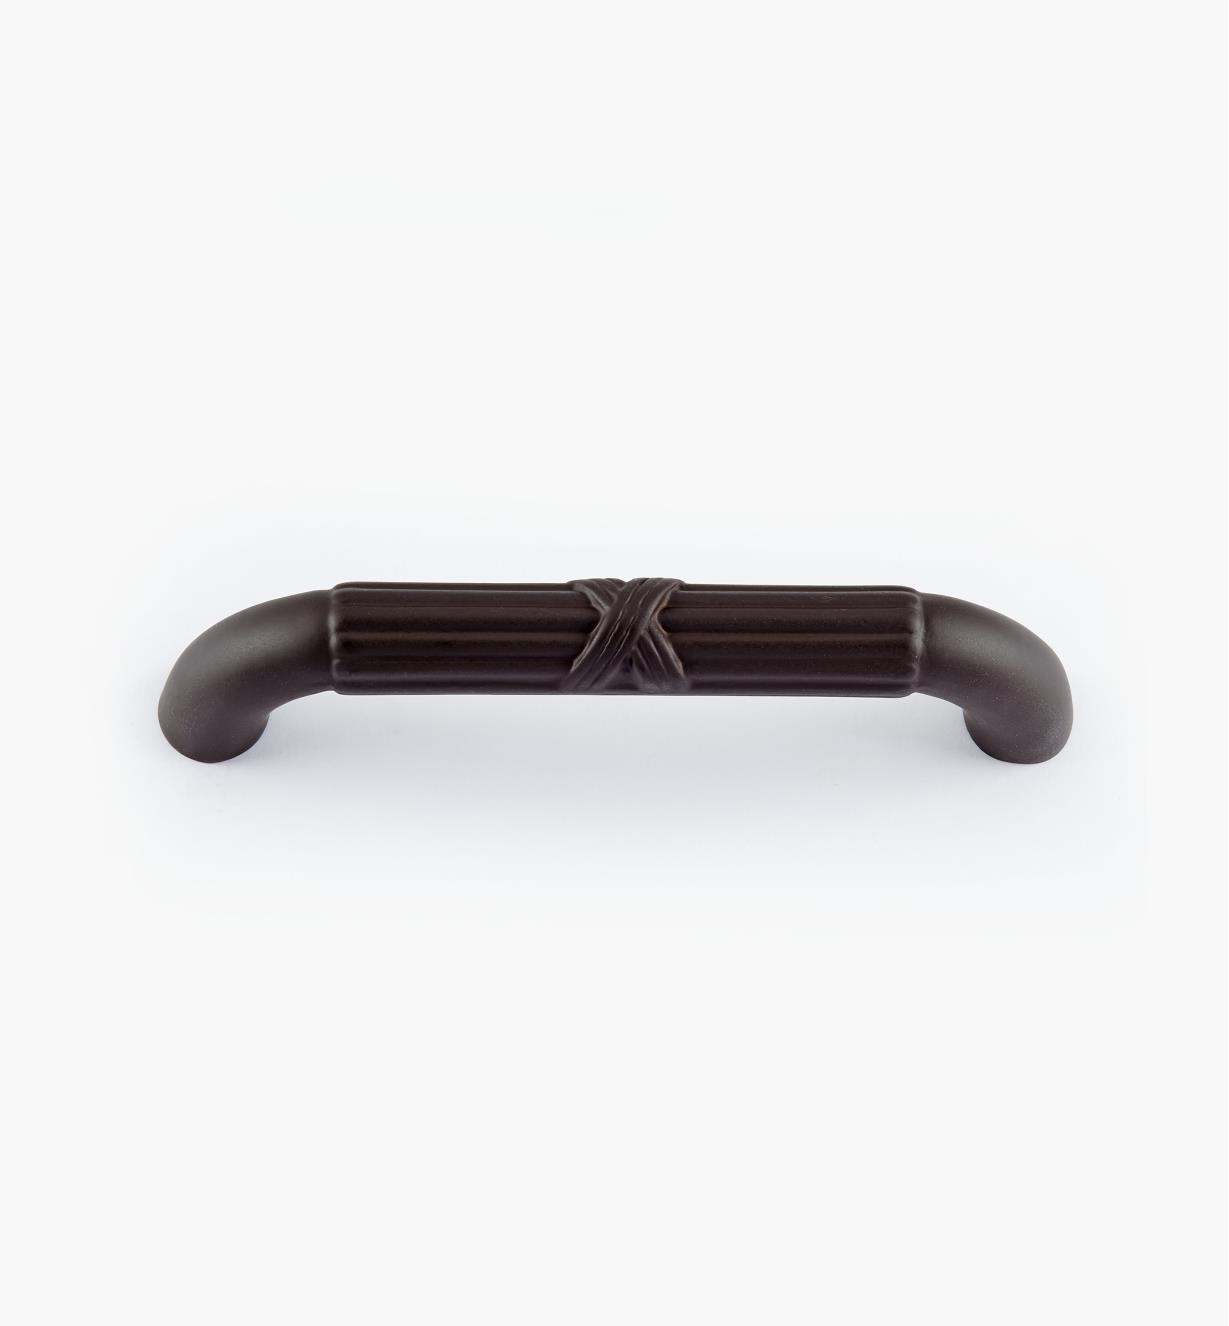 02W2027 - 4 1/8" Oil-Rubbed Bronze Handle (96mm)